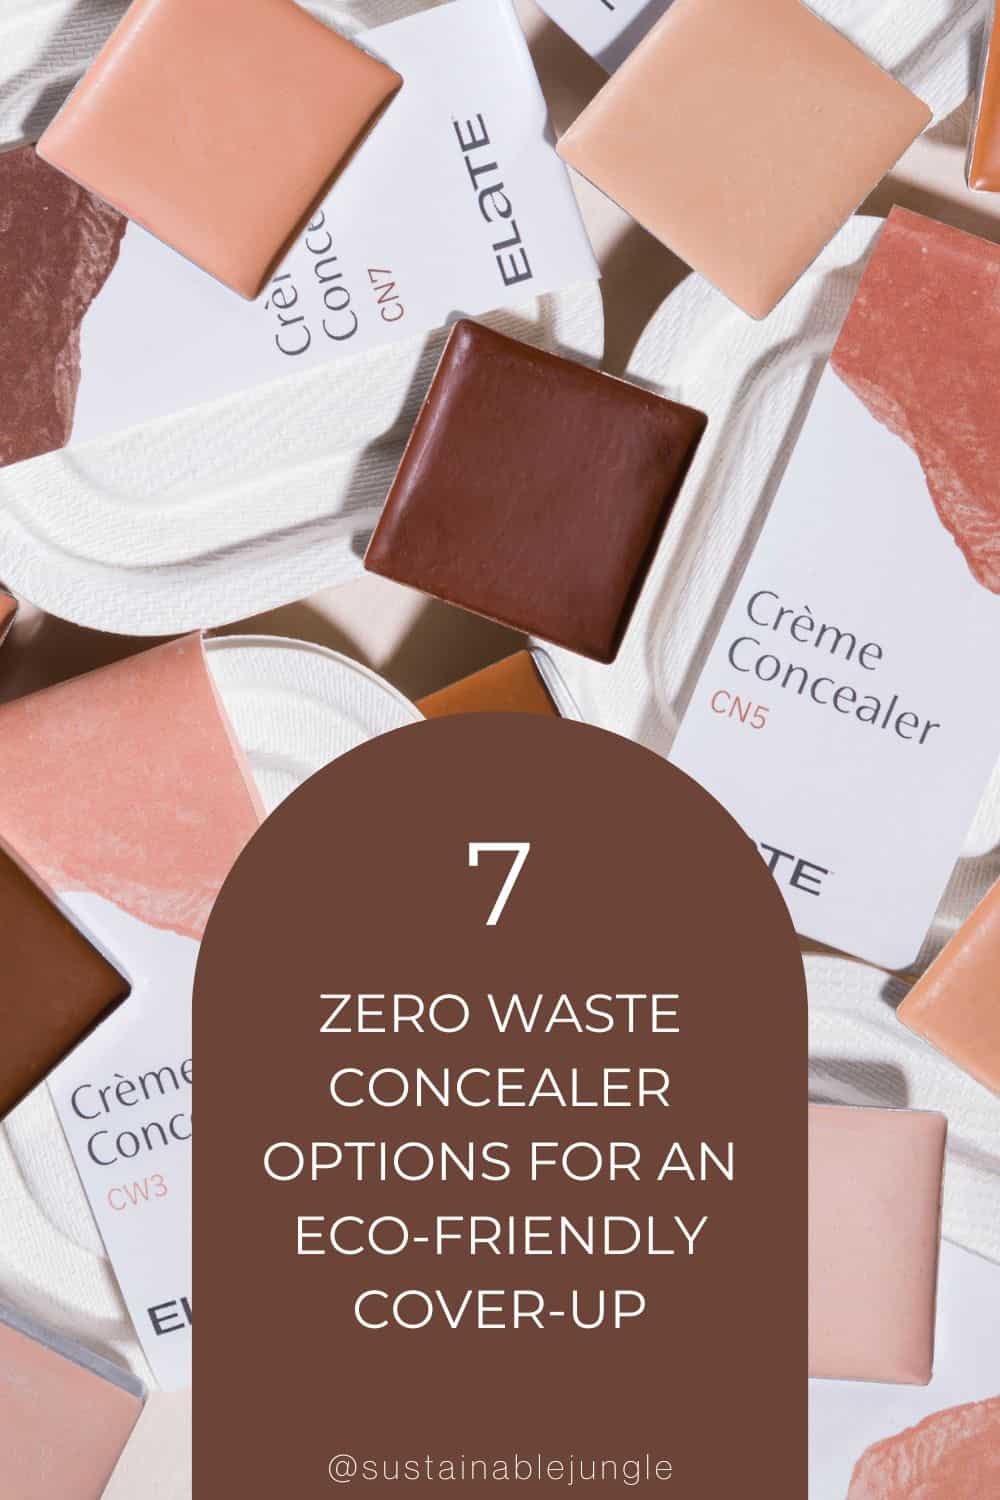 7 Zero Waste Concealer Options For An Eco-Friendly Cover-Up Image by Elate Cosmetics #zerowasteconcealer #zerowastemakeupconcealer #veganzerowasteconcealer #ecofriendlyconealer #bestecofriendlyconcealer #sustainablejungle